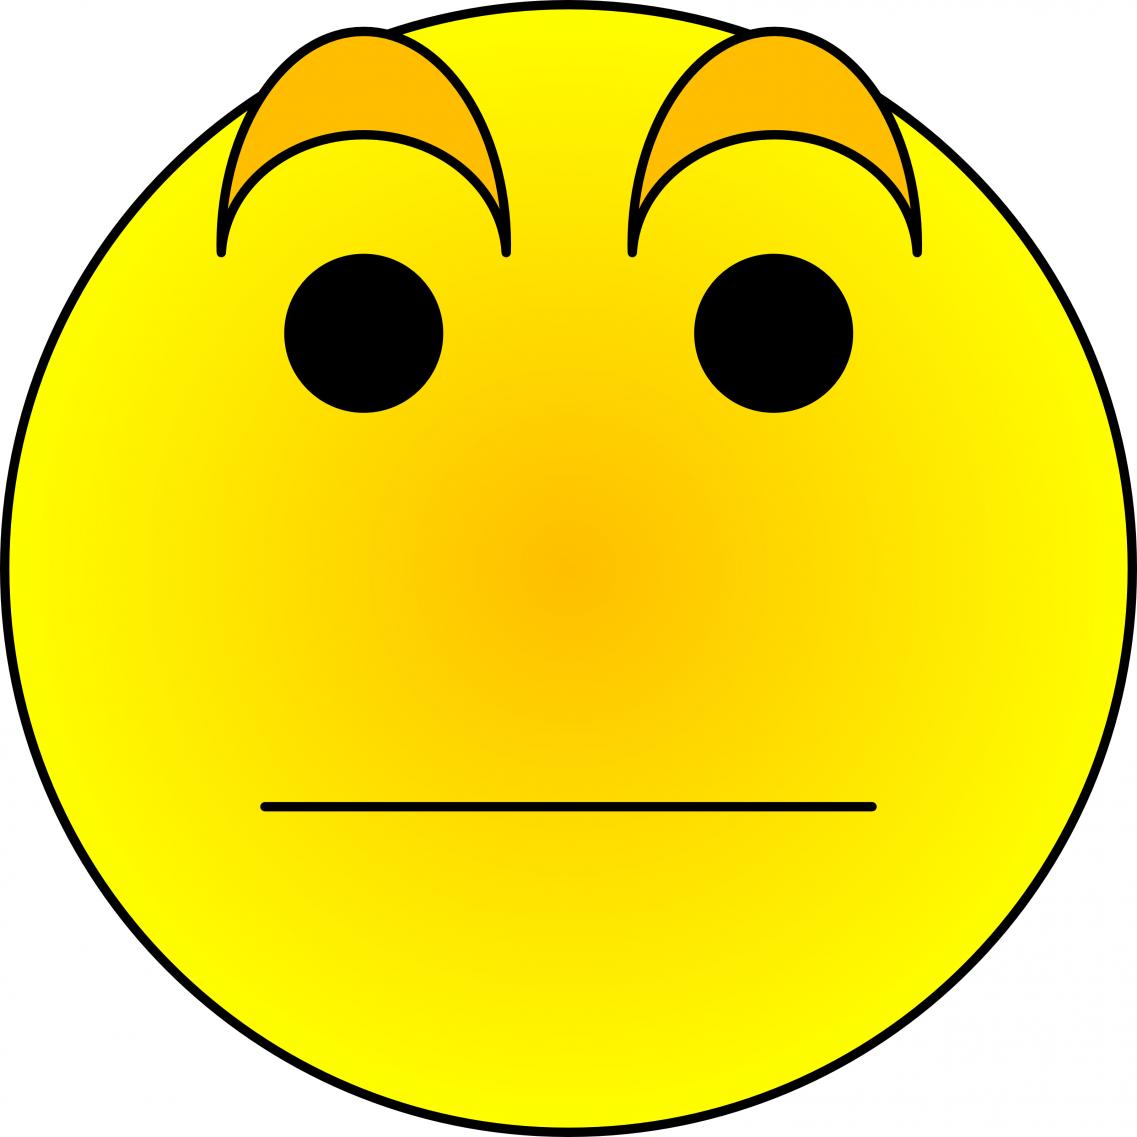 Smiley Face Sad Face Straight Face | Free Download Clip Art | Free ...